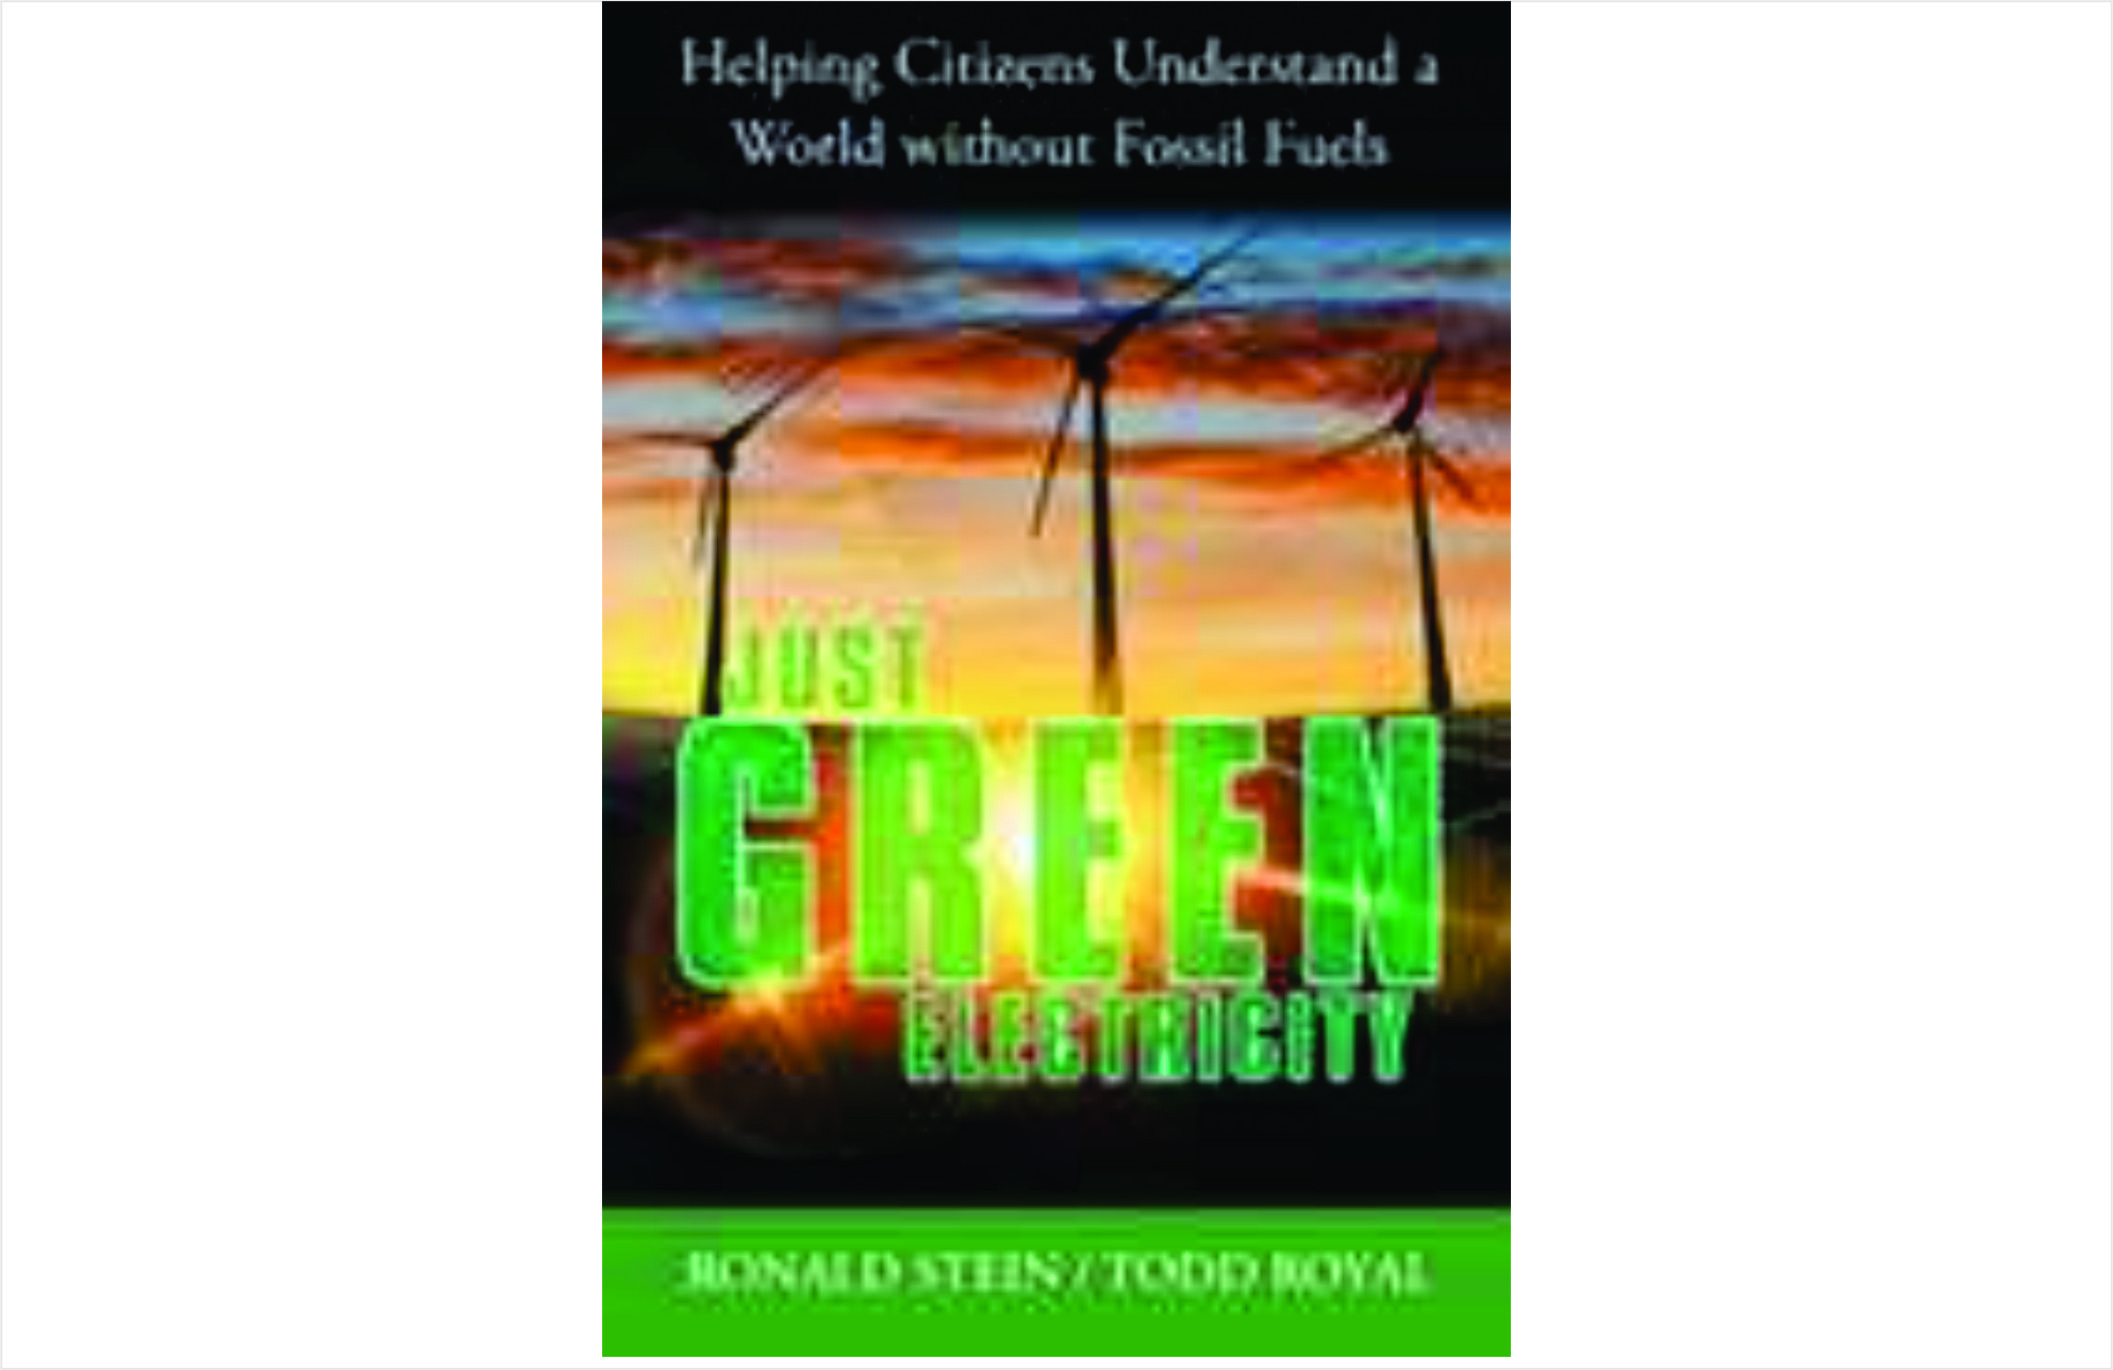 New book brings clarity to a world without fossil fuels